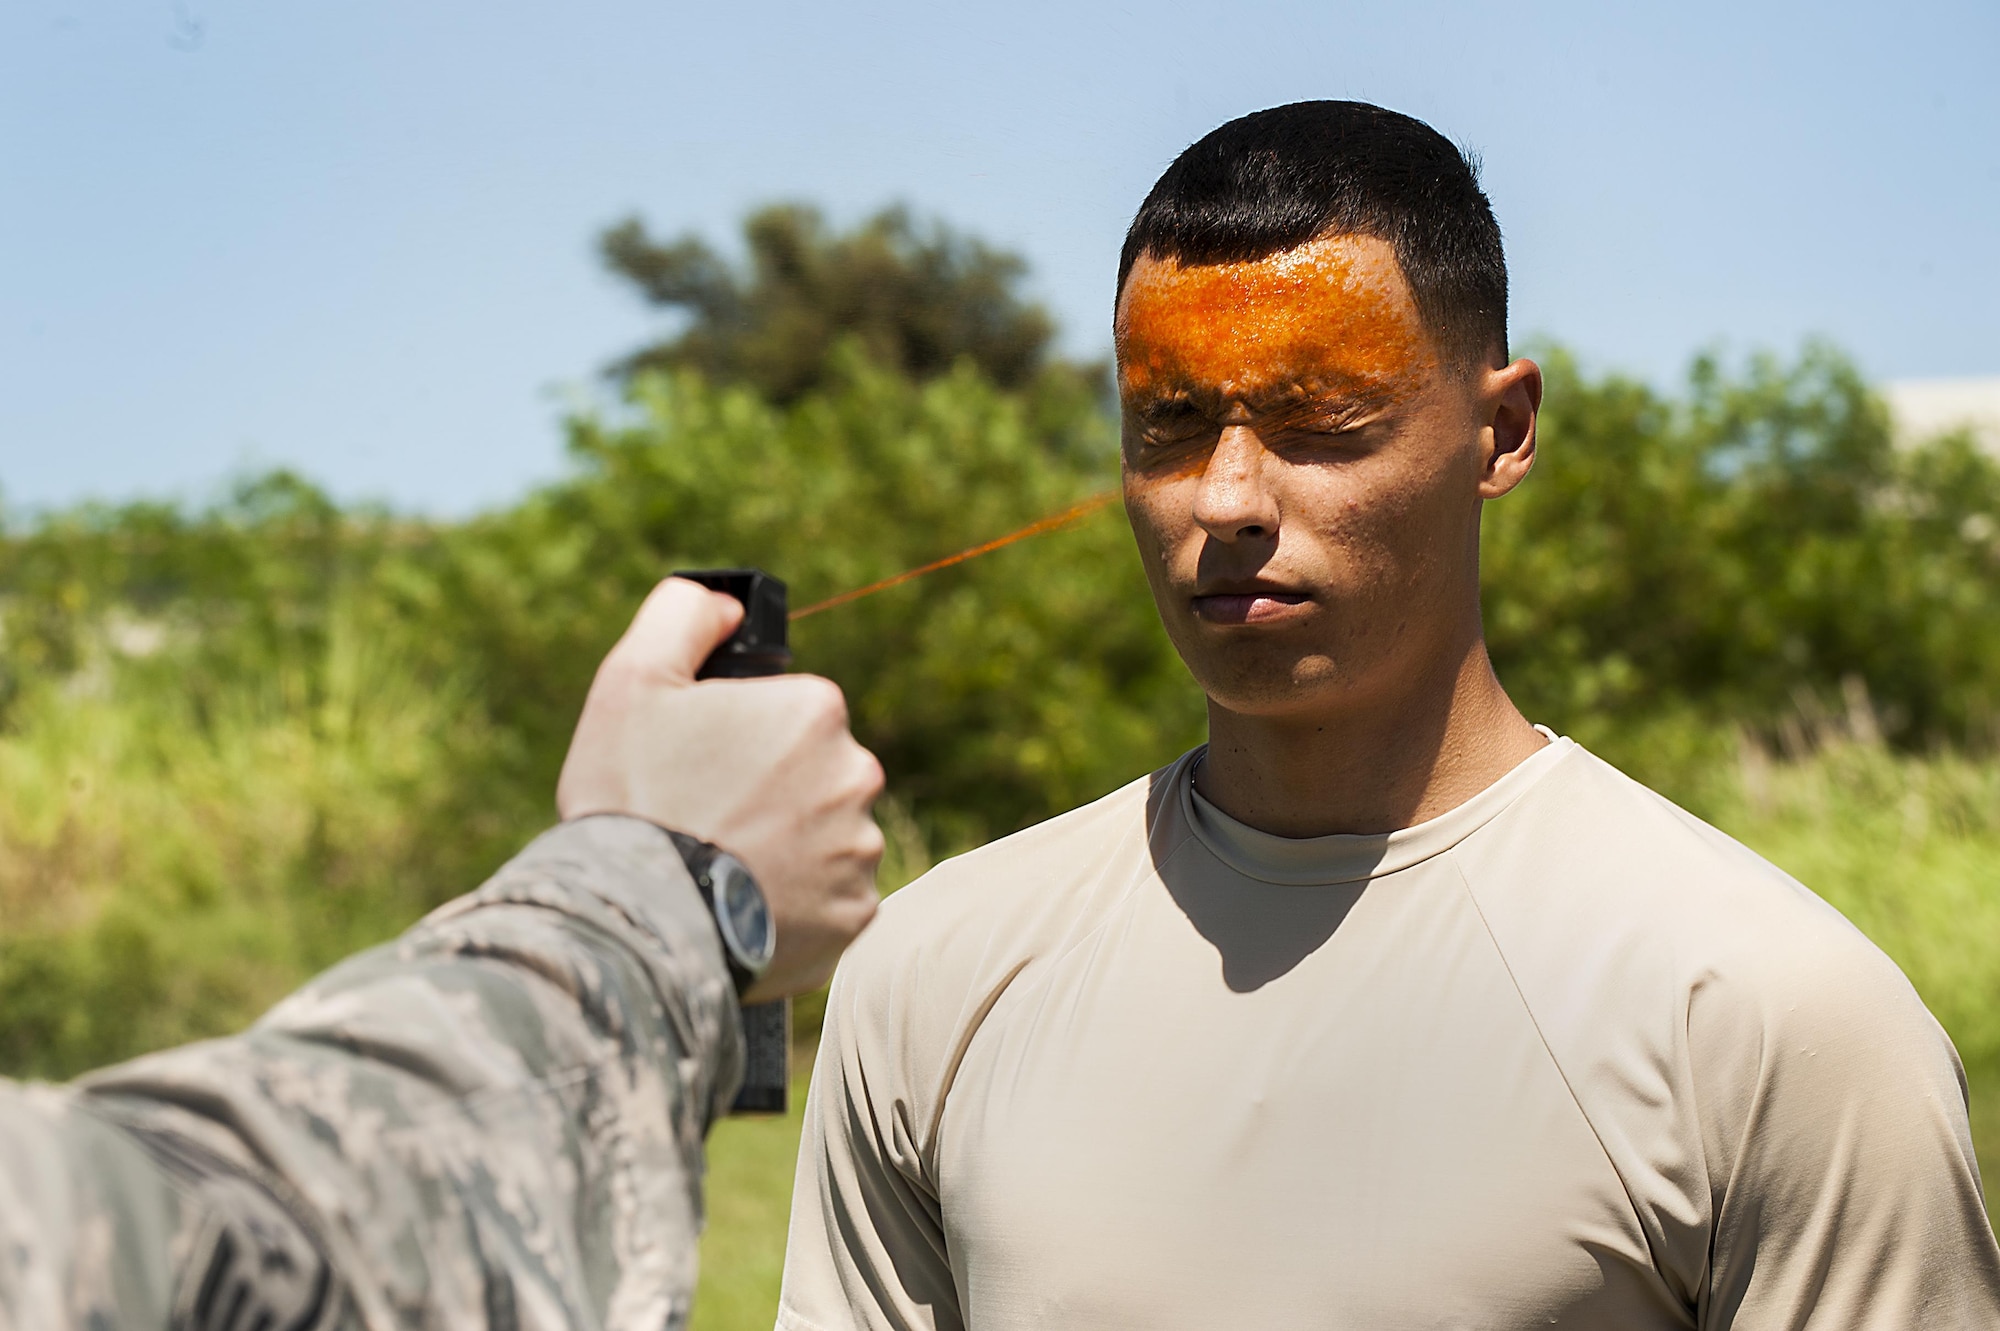 U.S. Air Force Airman 1st Class Dustin Sullivan, 18th Security Forces Squadron response force member, gets sprayed in the eyes with OC spray during training July 13, 2016 at Kadena Air Base, Japan. In order to be certified to use OC spray, SFS members must be sprayed and complete an obstacle course involves M-9 pistol reloading, subduing someone in a red-man suit and carrying water jugs around cones. (U.S. Air Force photo by Airman 1st Class Corey M. Pettis)